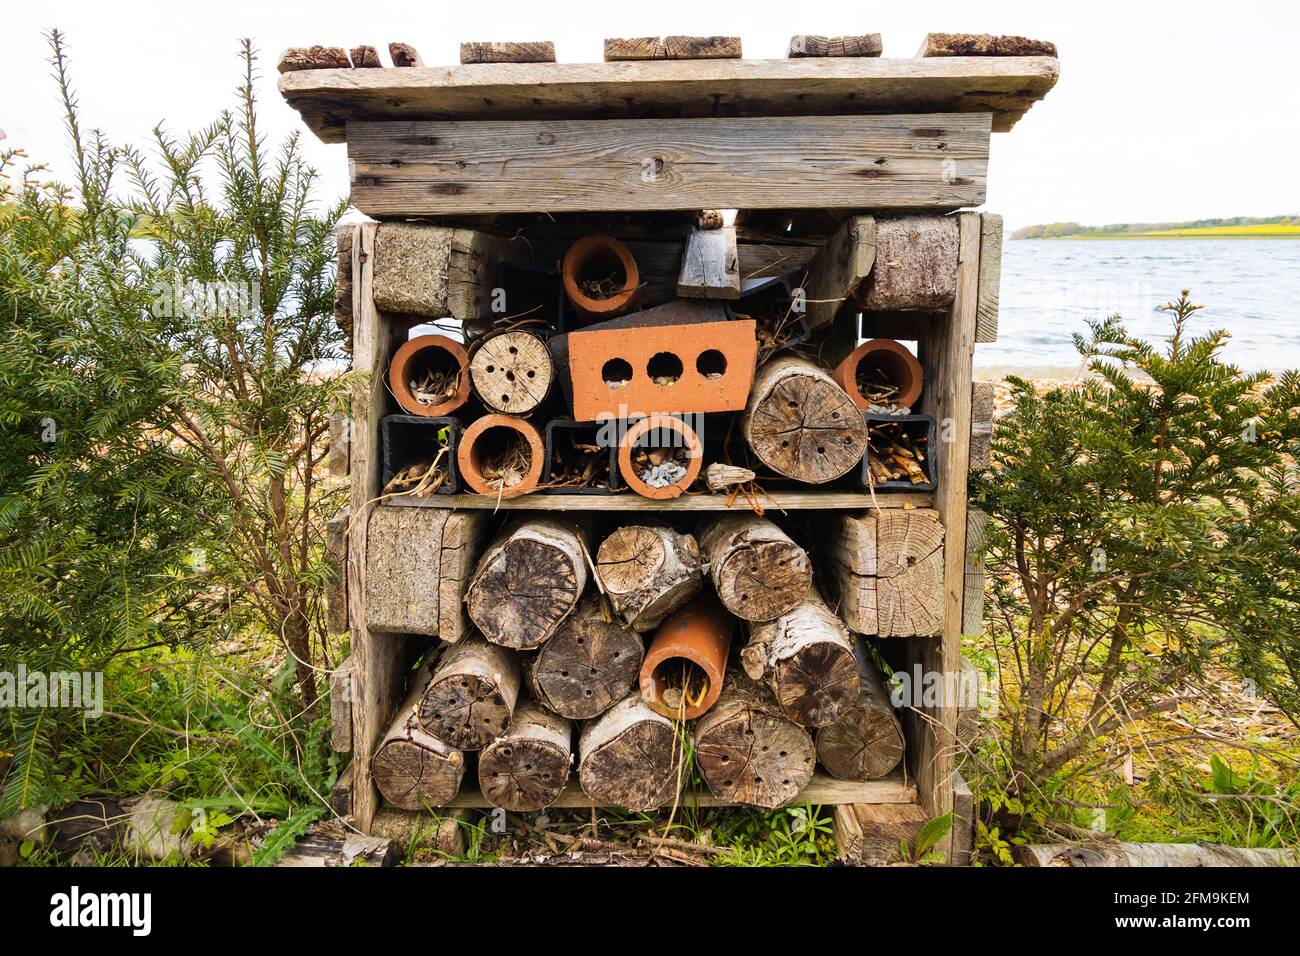 bug hotel, insect house. Wildlife conservation. Old bricks and wood with holes provide ideal hibernation and breeding facilities for bugs and bees. Stock Photo